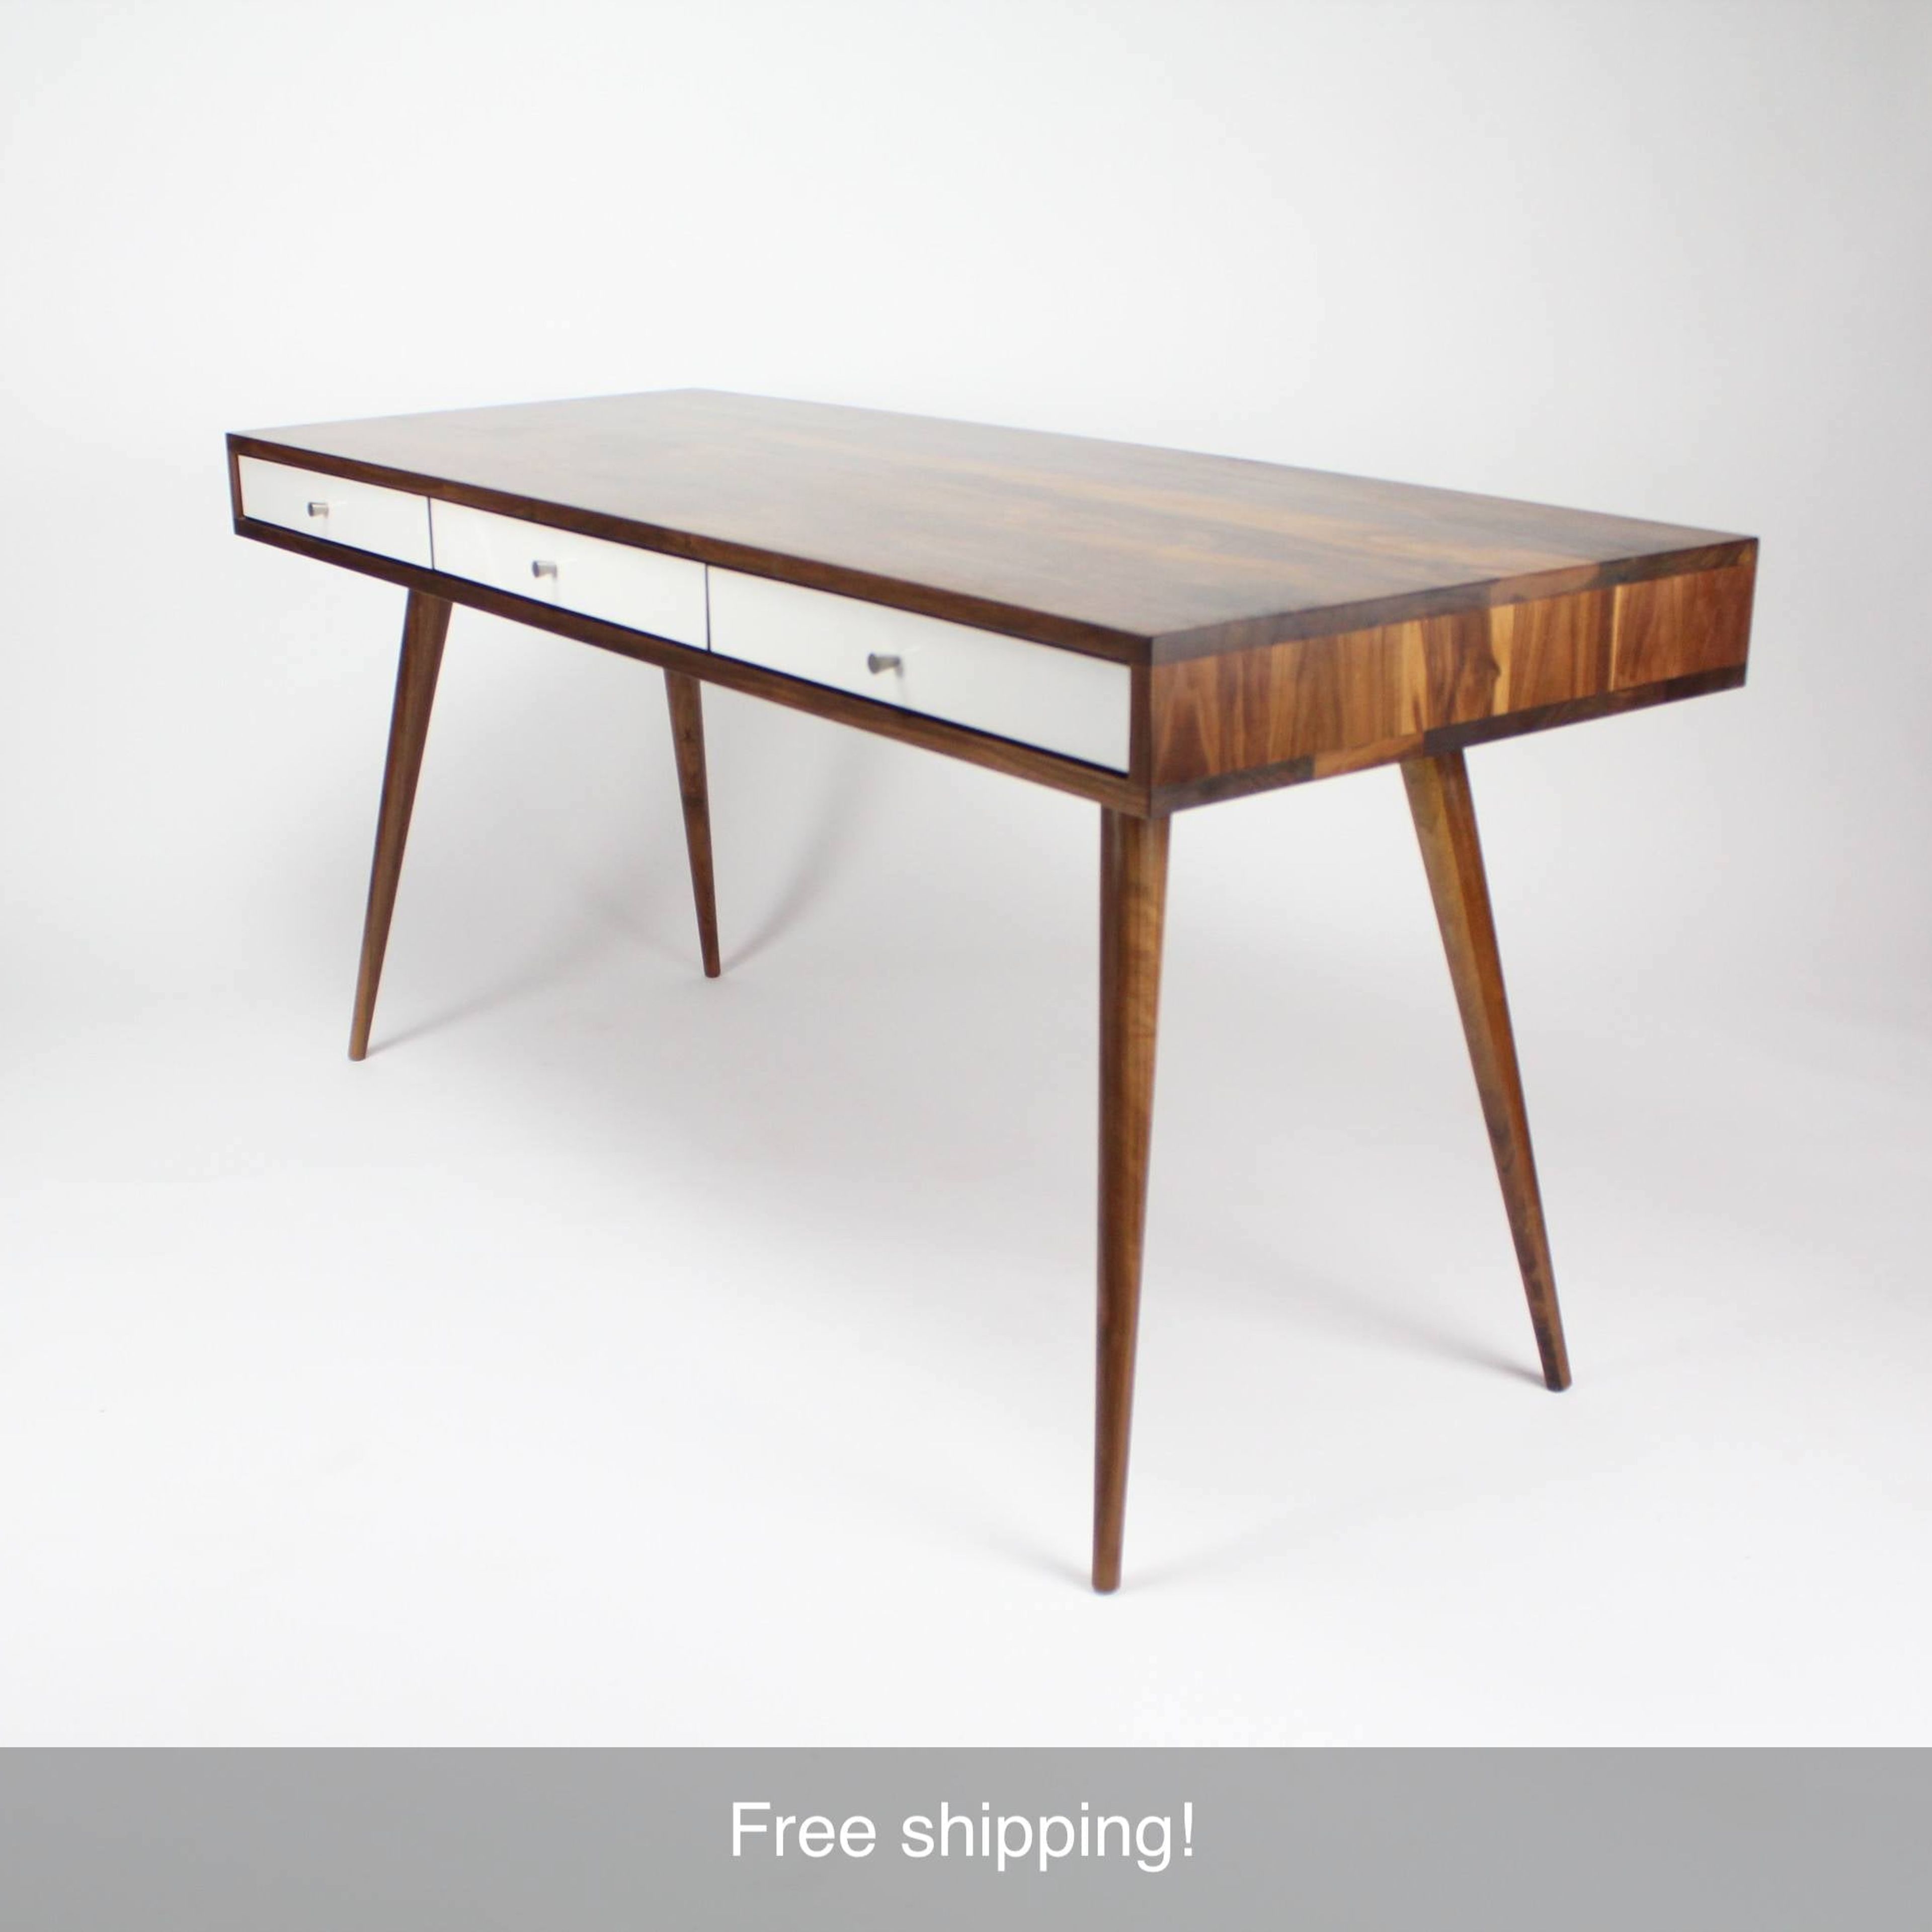 Walnut Mid Century Desk with Cord Management Available now!